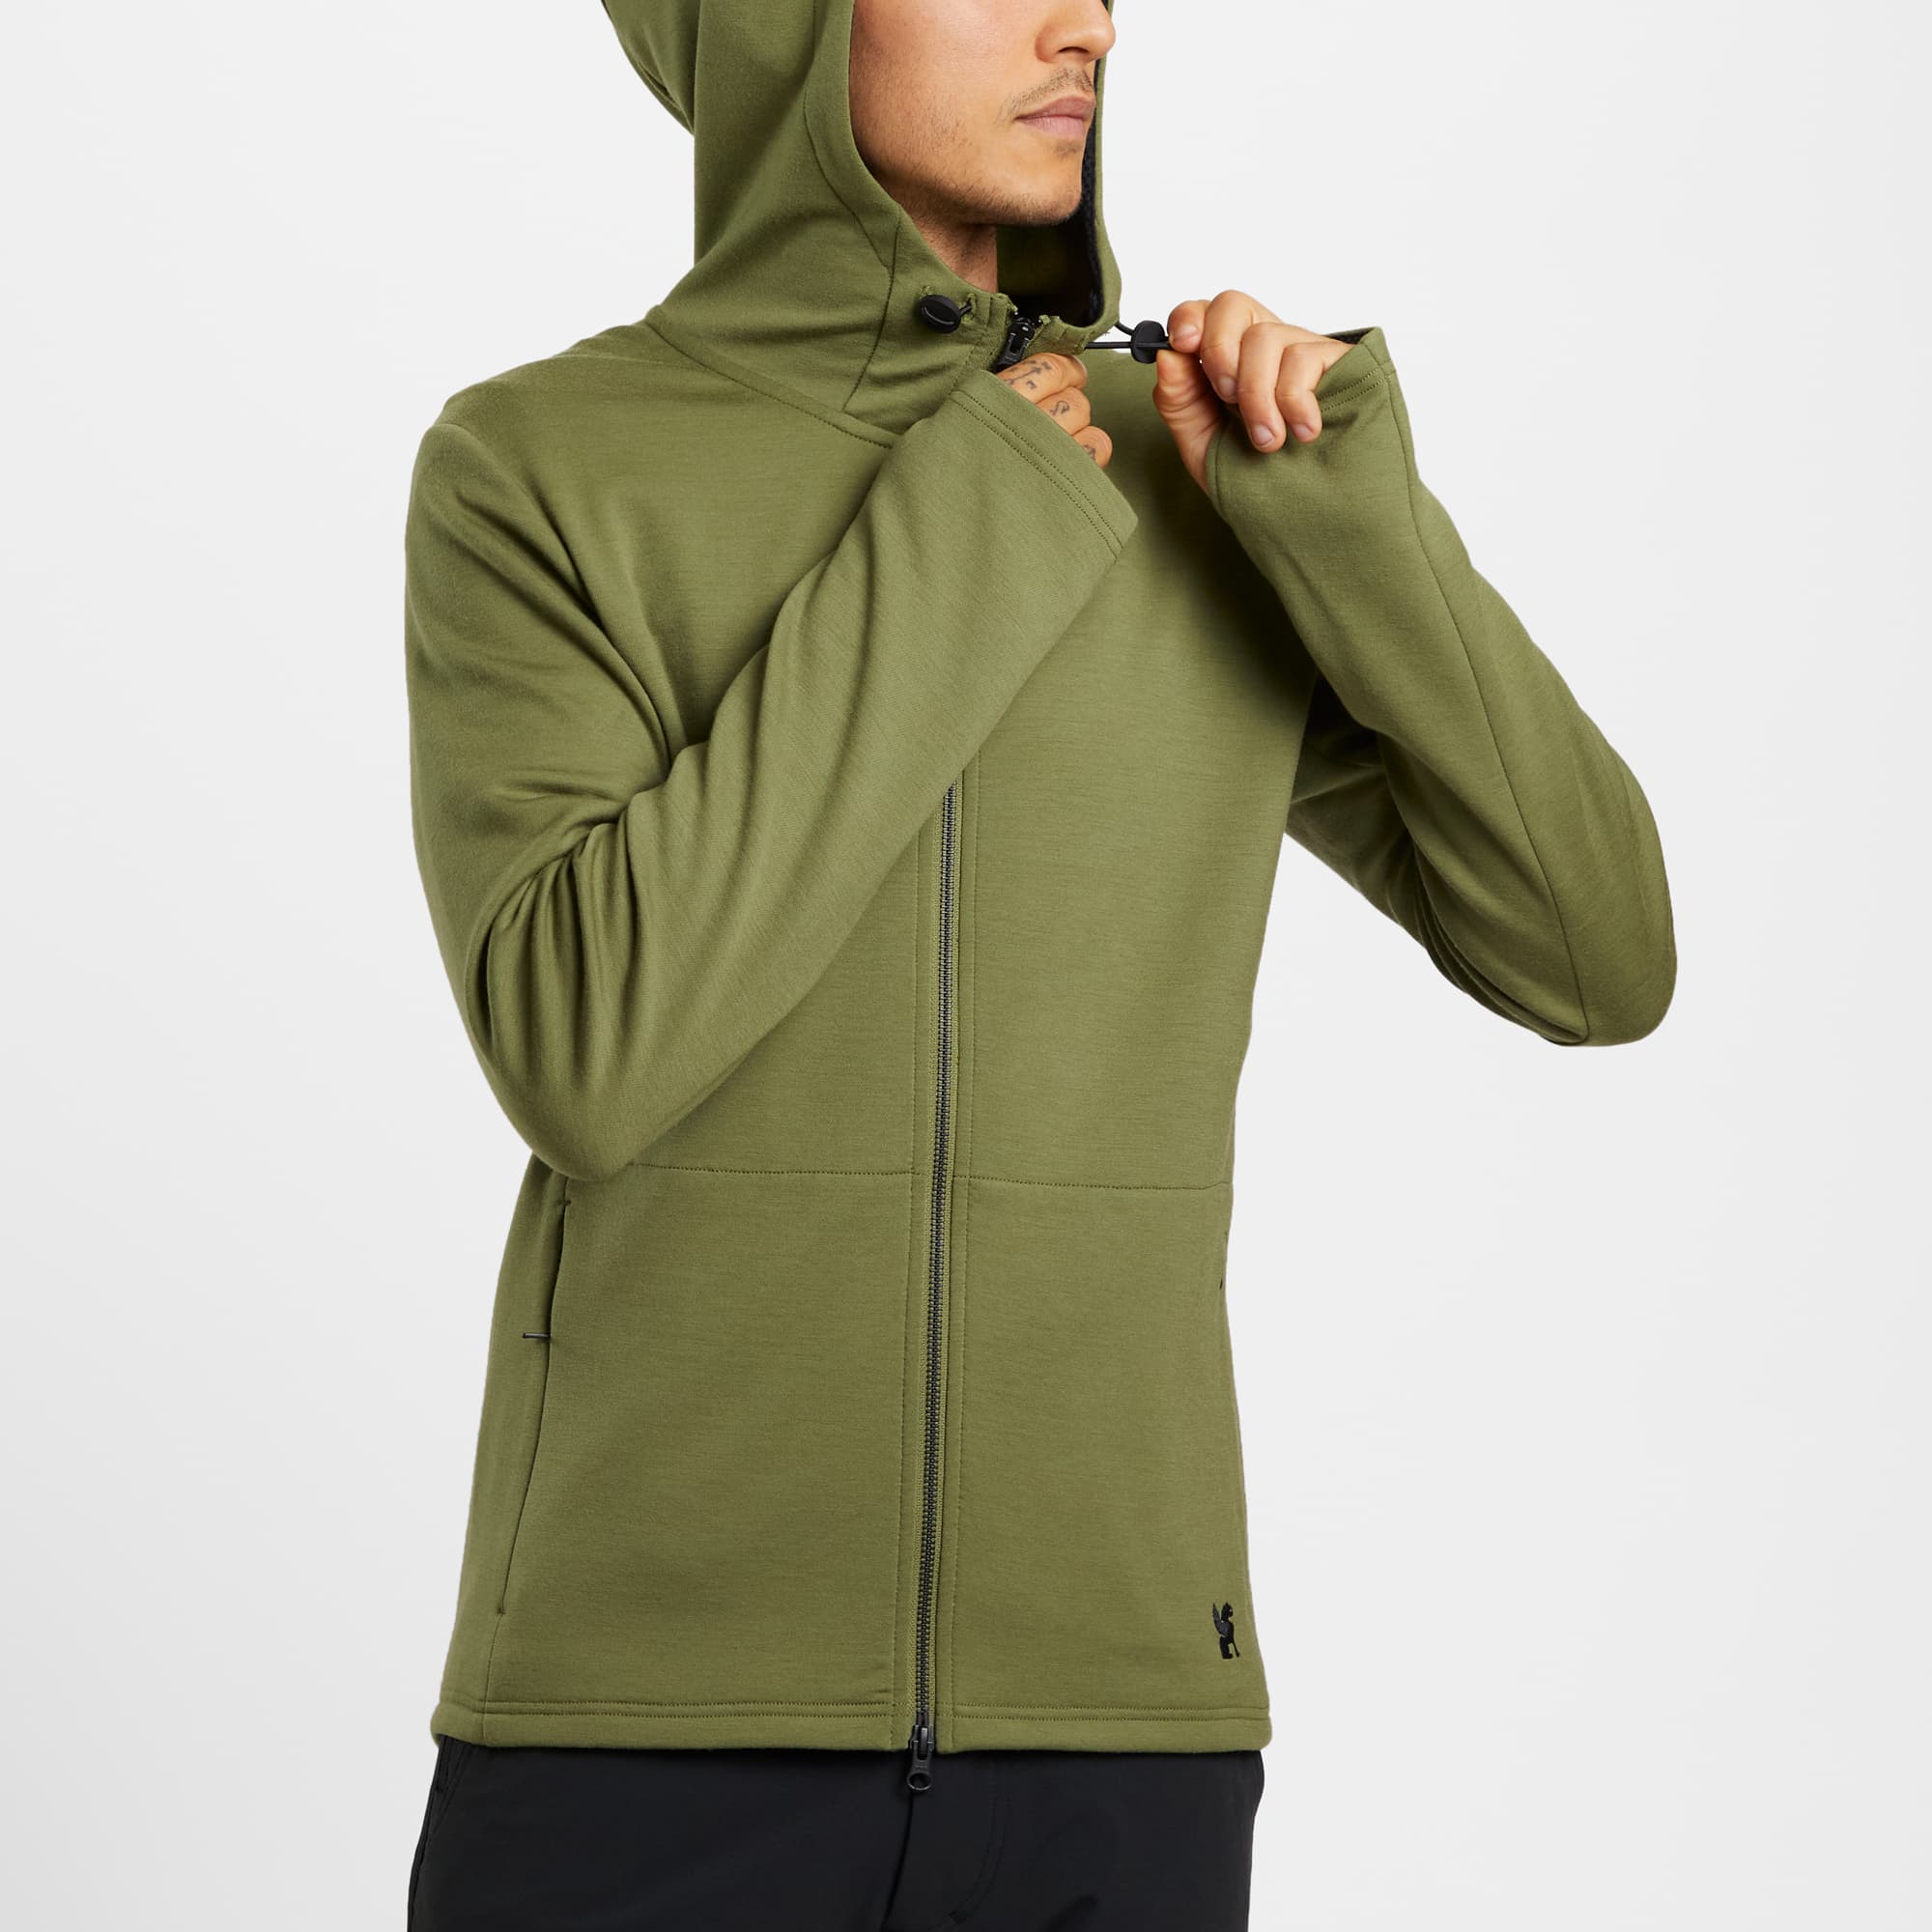 Men's merino blend hoodie in green worn by a man hood toggle detail #color_olive branch